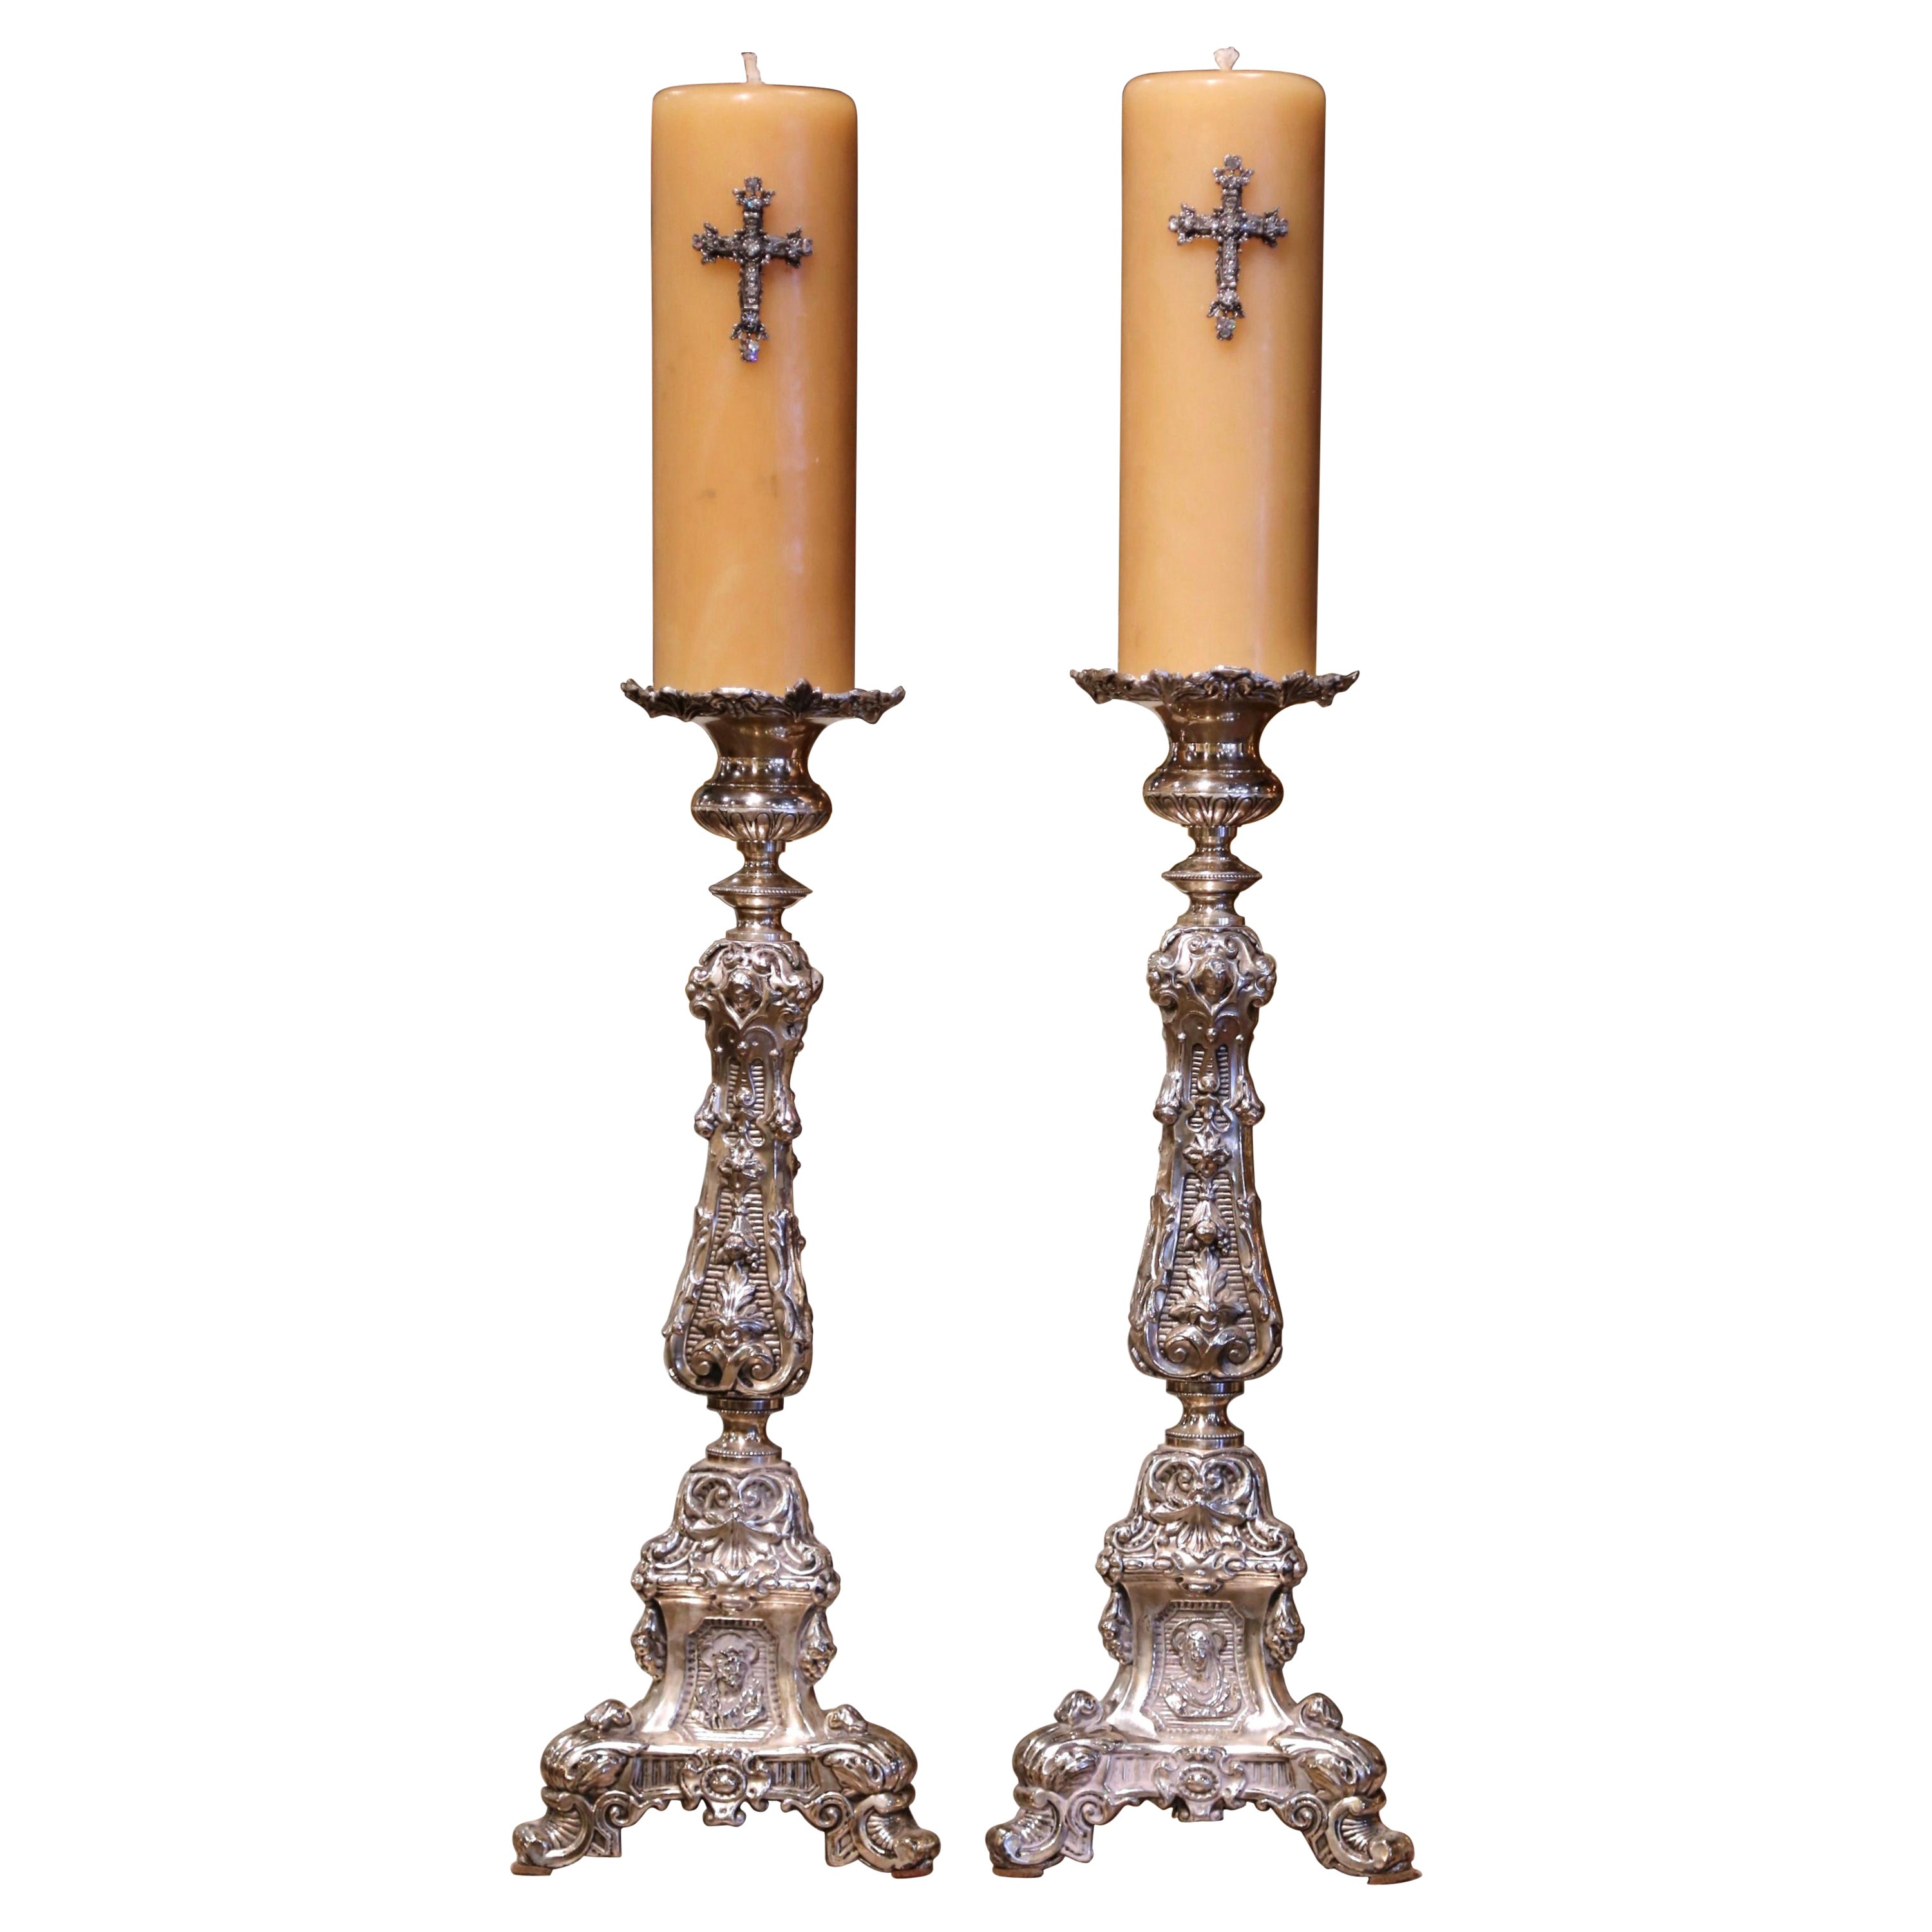 Pair of 19th Century French Carved Repousse Silver Plated Brass Candle Holders